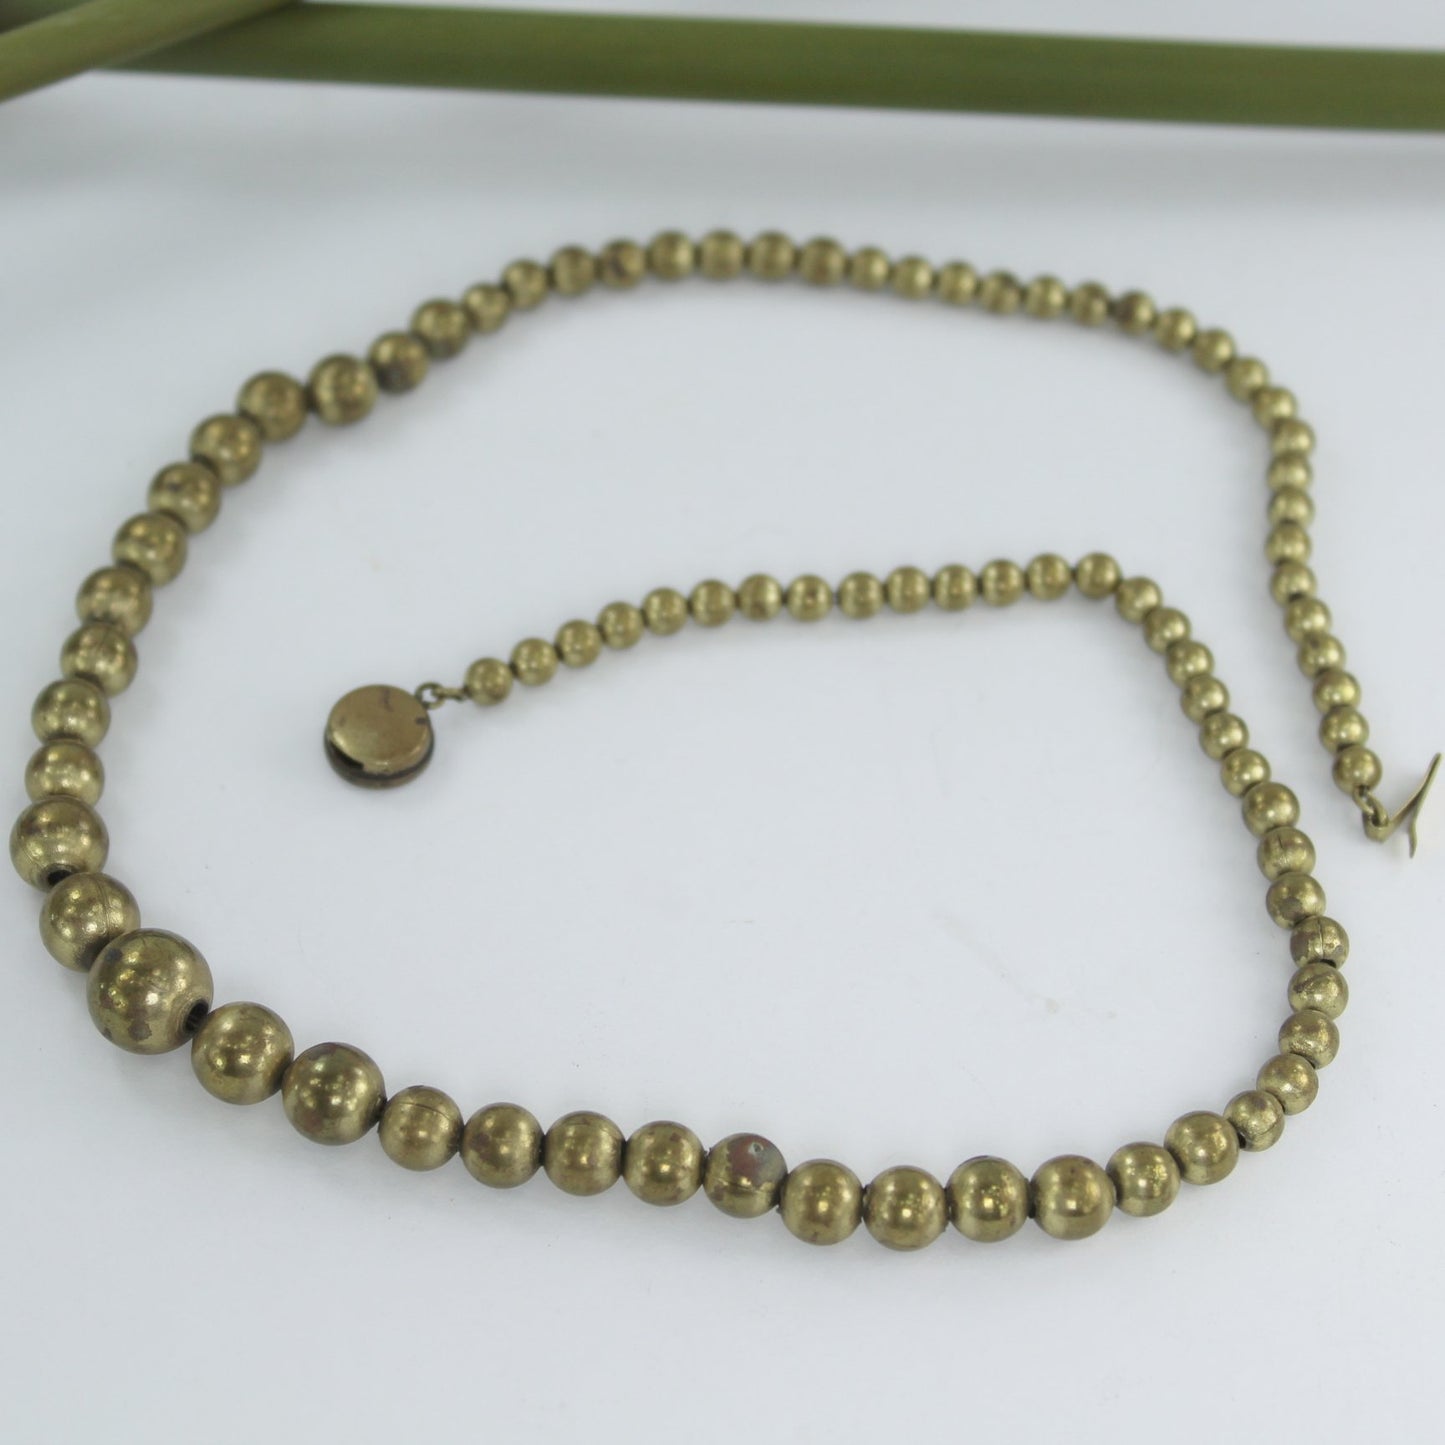 Brass Bead Necklace 1940s Graduated Size Chain Strung open view of necklace